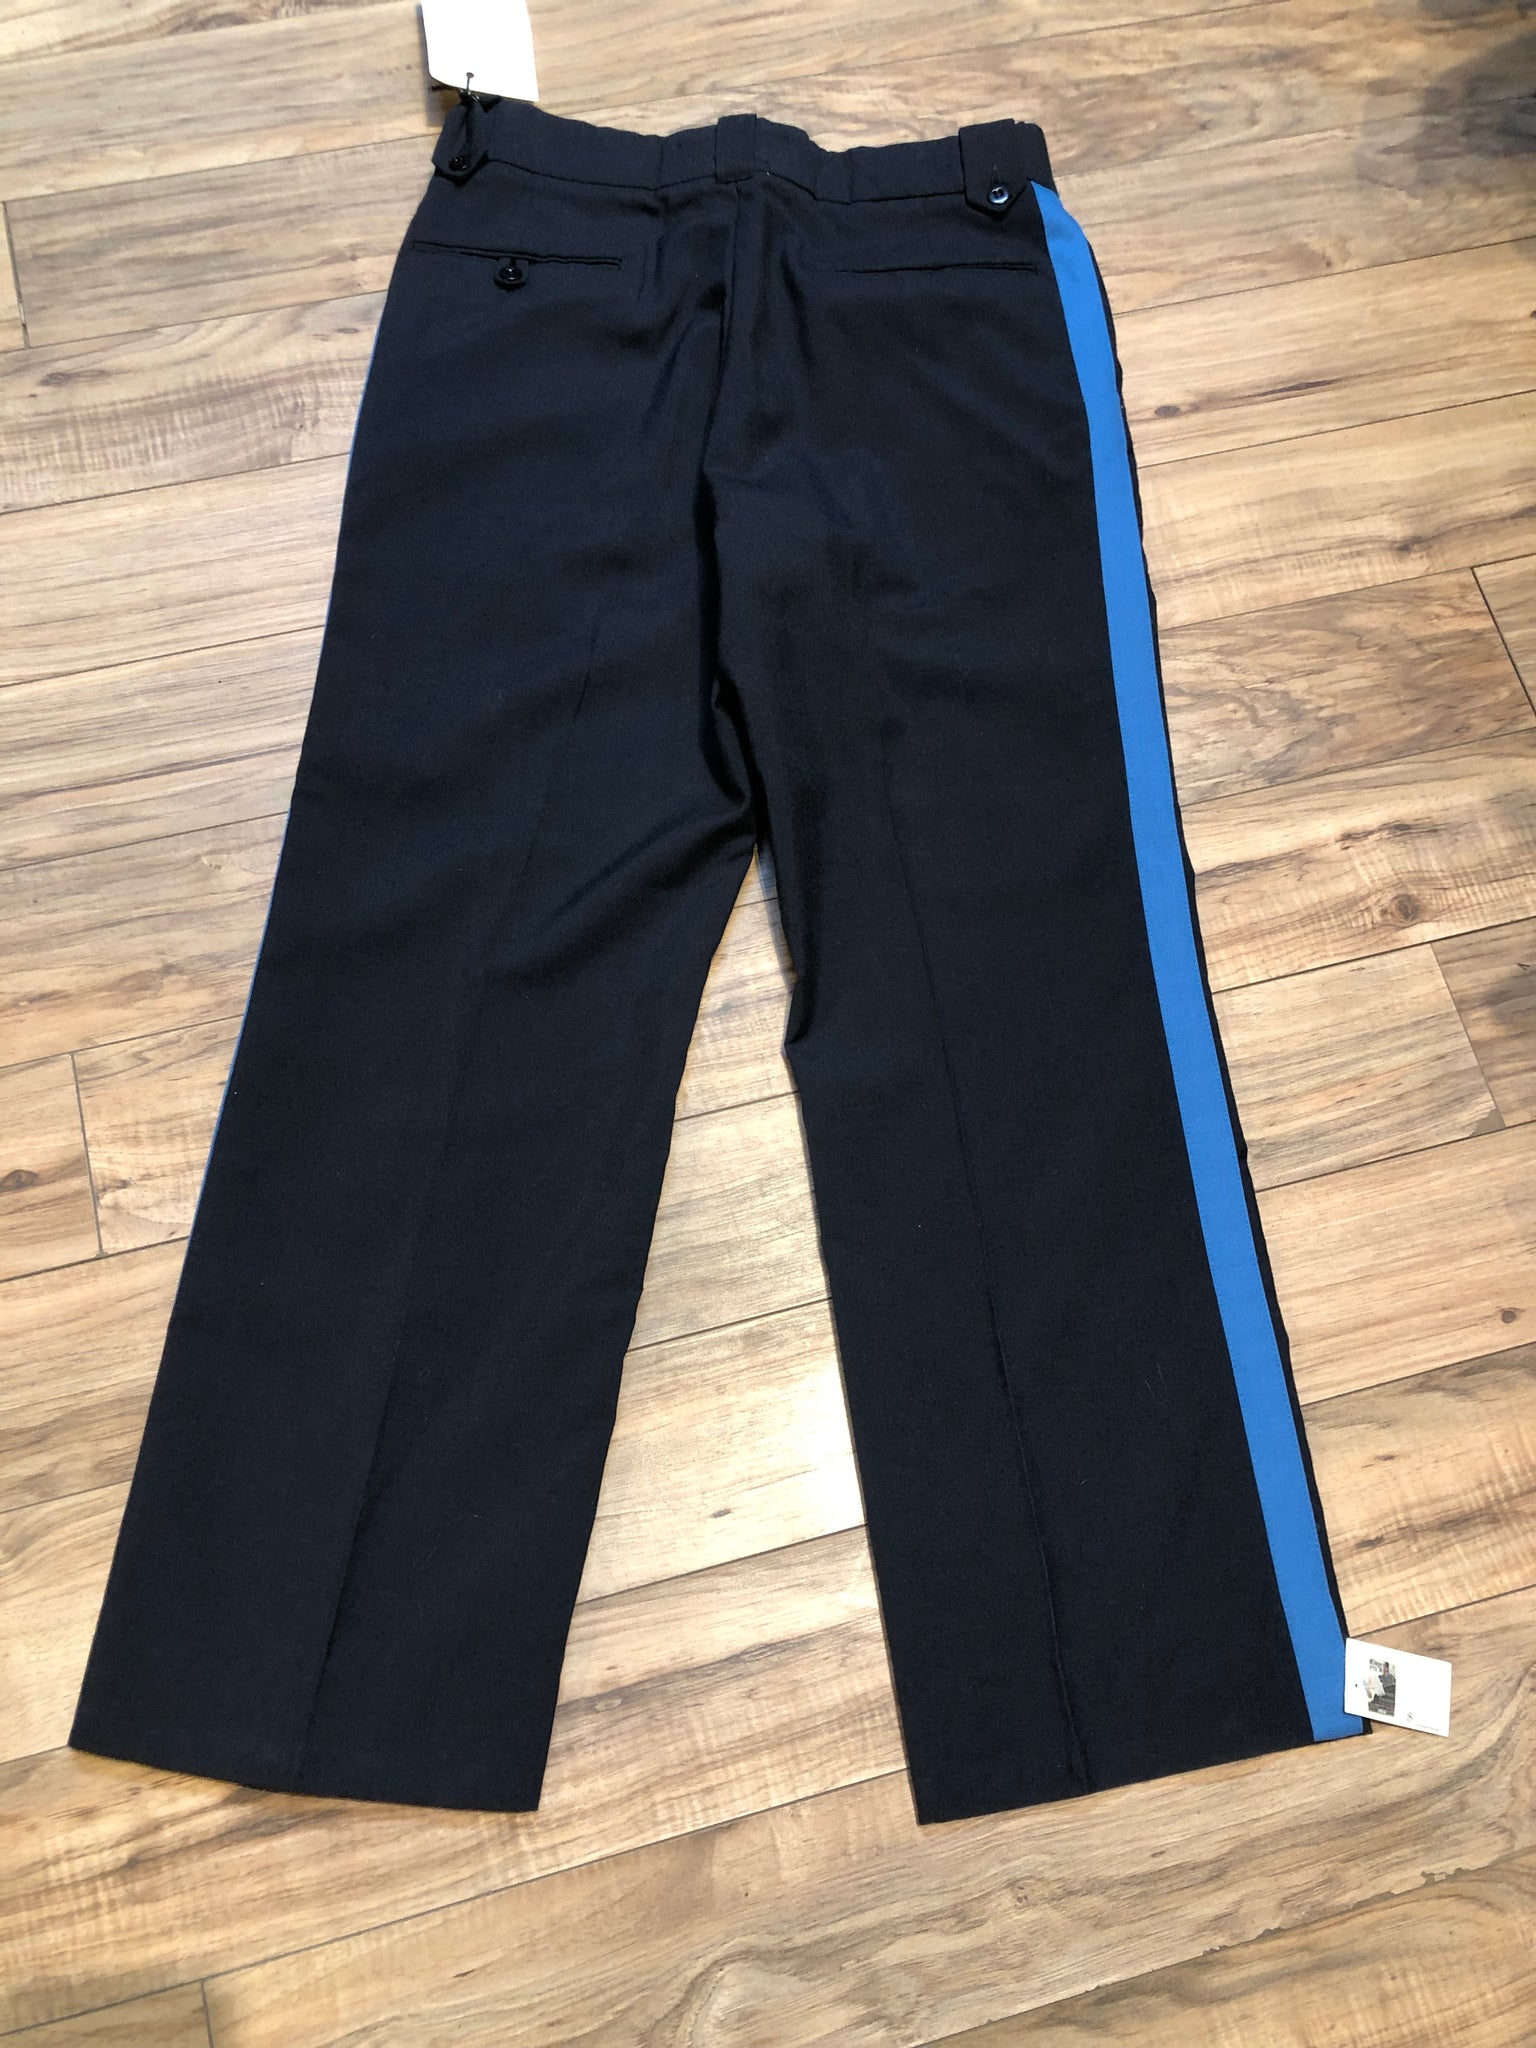 Vintage 90's Aero Mode Uniform Pants with Blue Stripe, Made in Canada, –  KingsPIER vintage